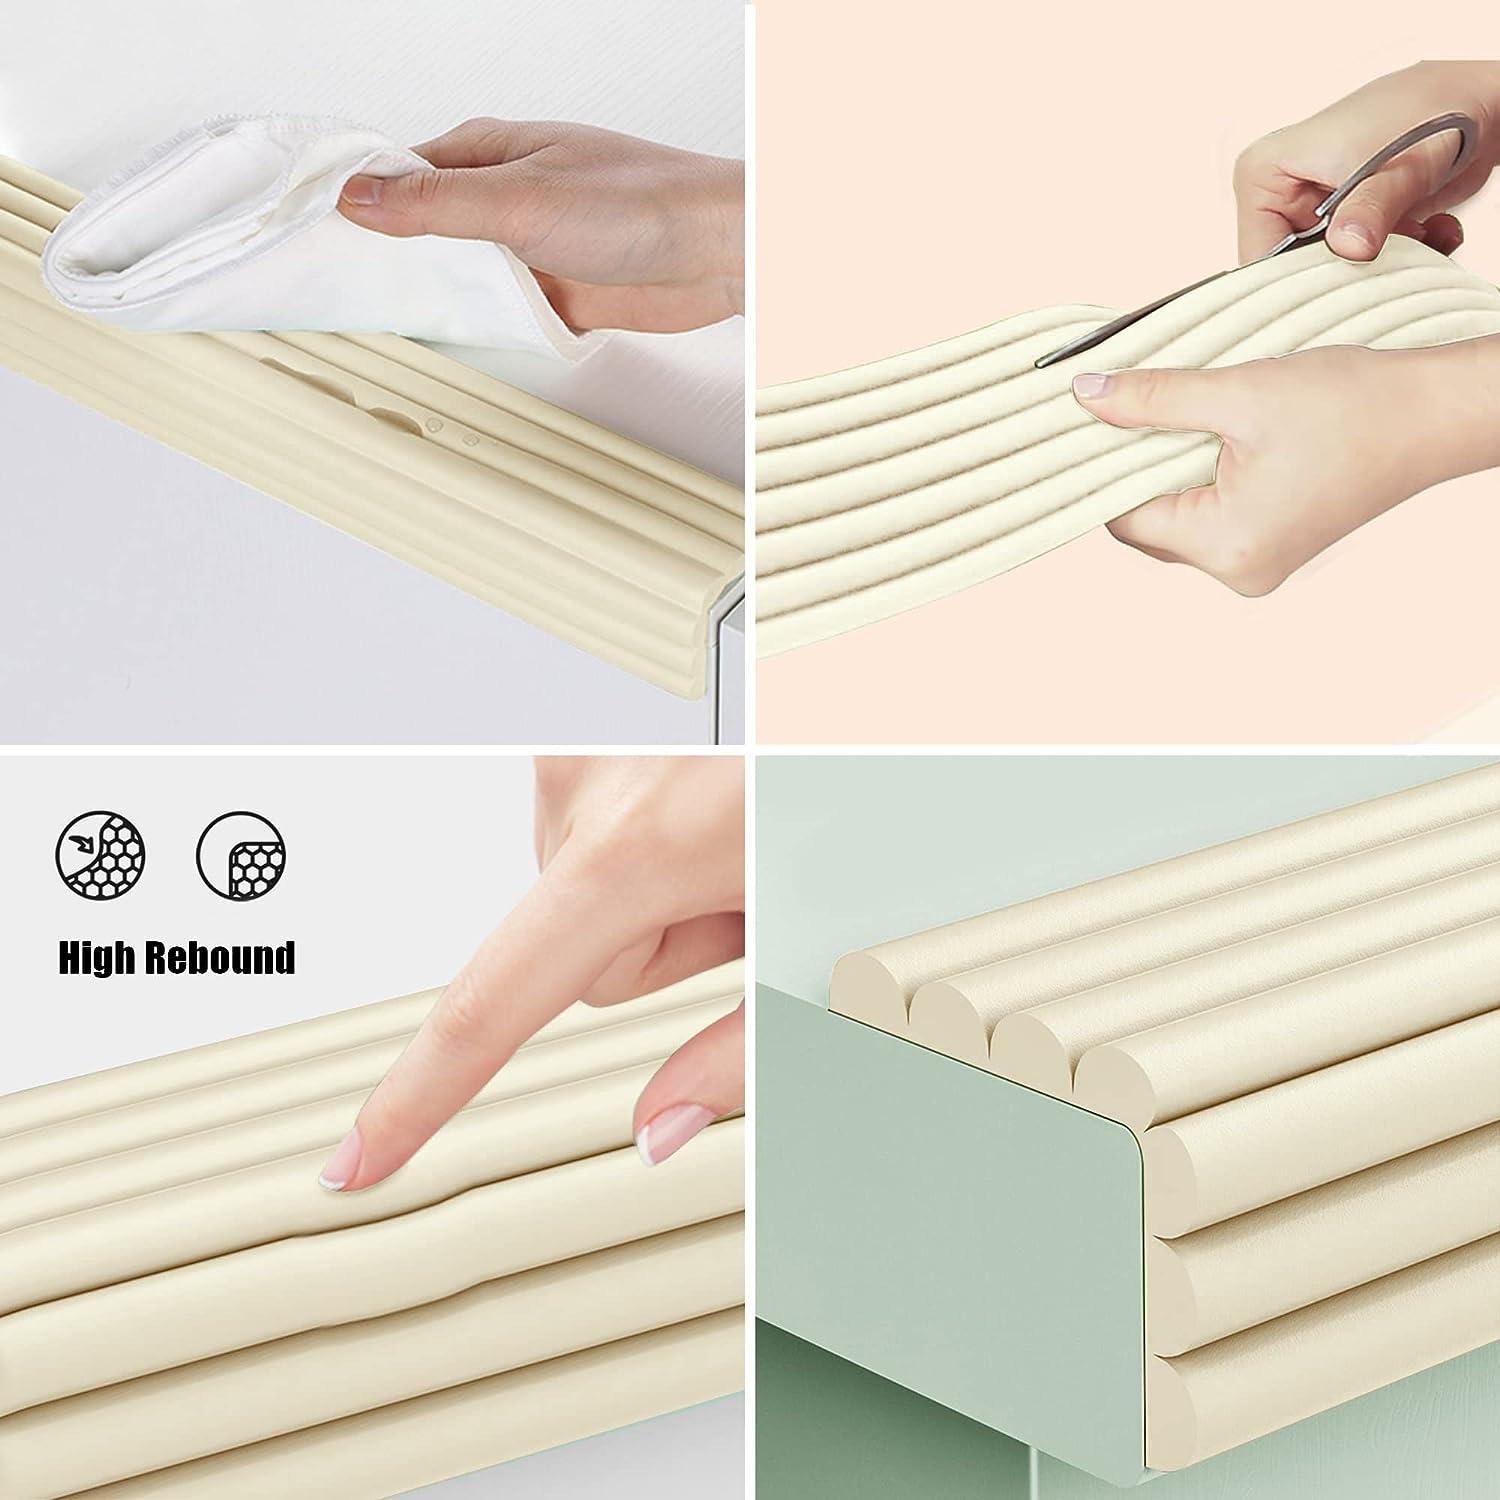 Foam Edge Guards for Baby Proofing | Evenflo Official Site